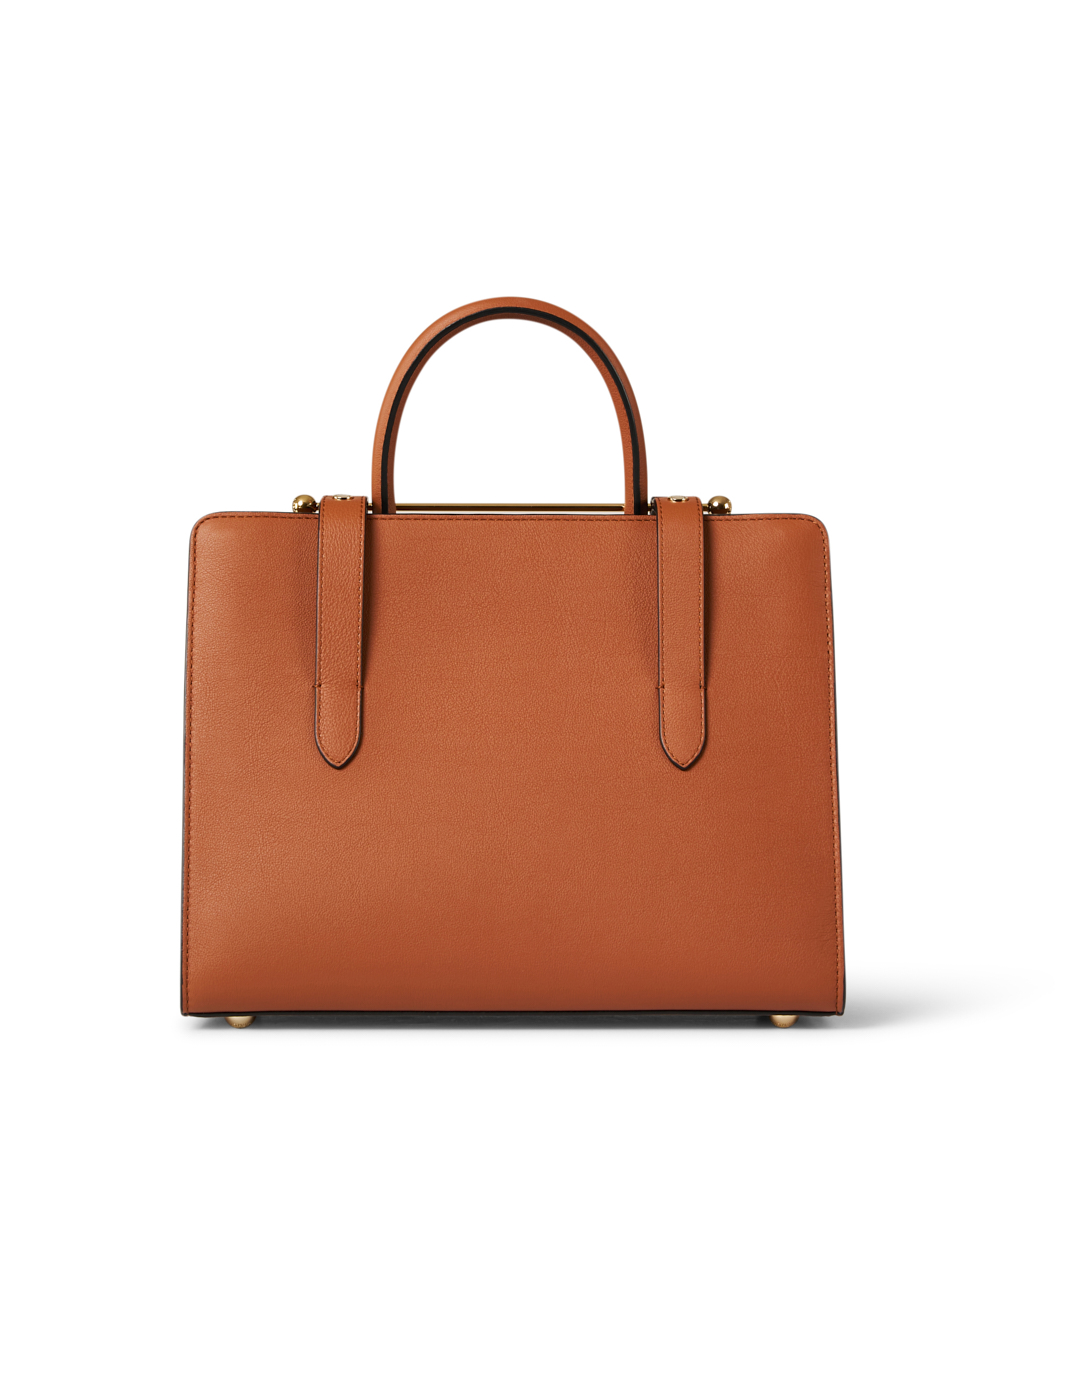 Strathberry Women's Midi Leather Tote - Chestnut One-Size